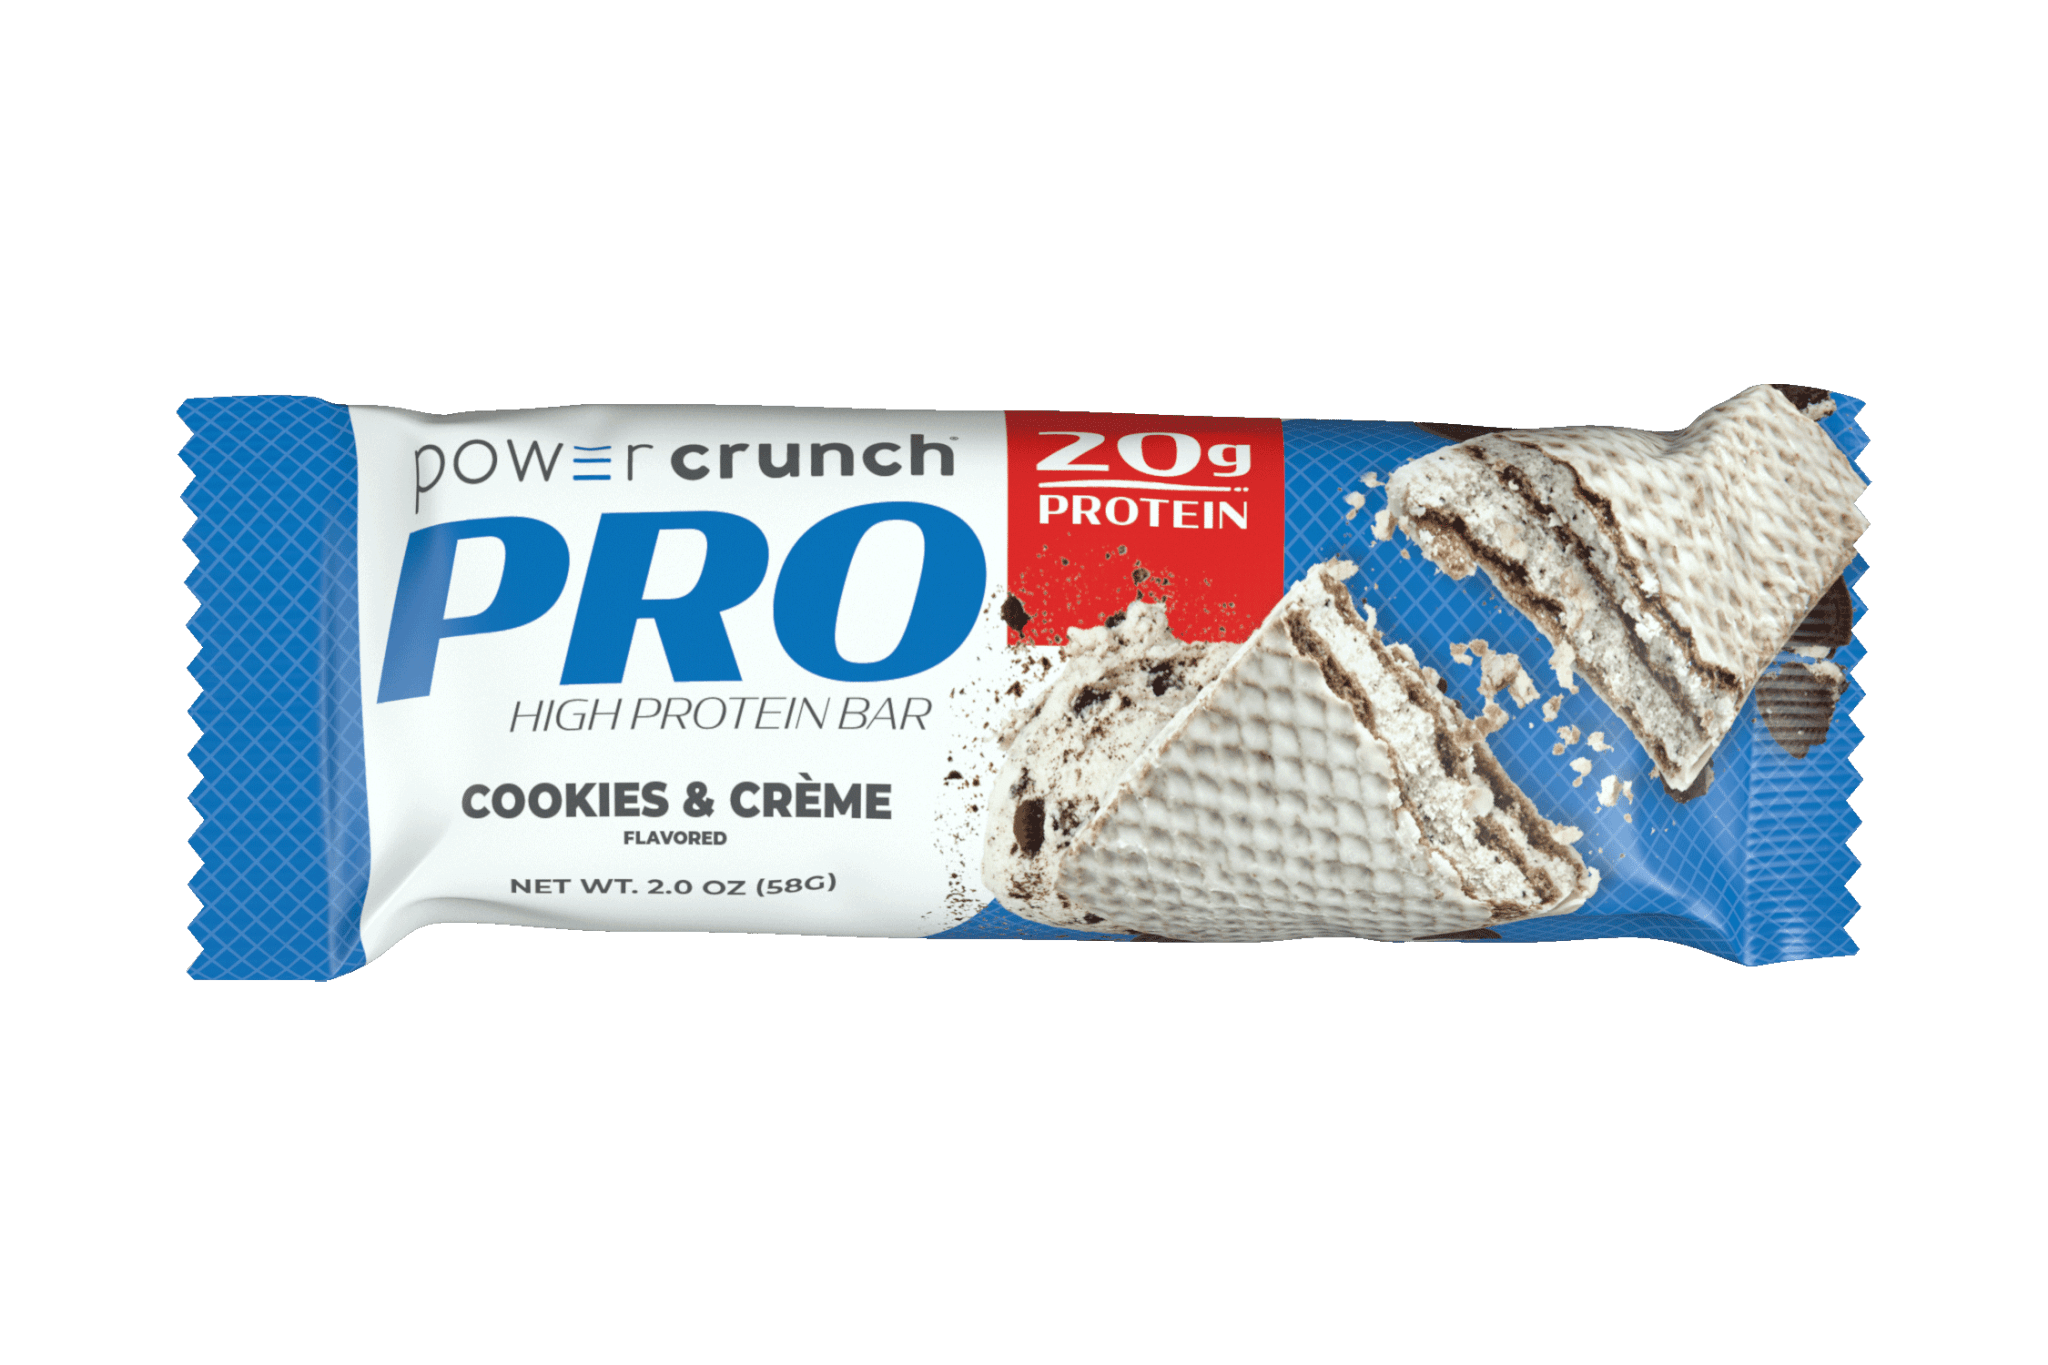 Power Crunch Cookies and Cream PRO 20g protein bars